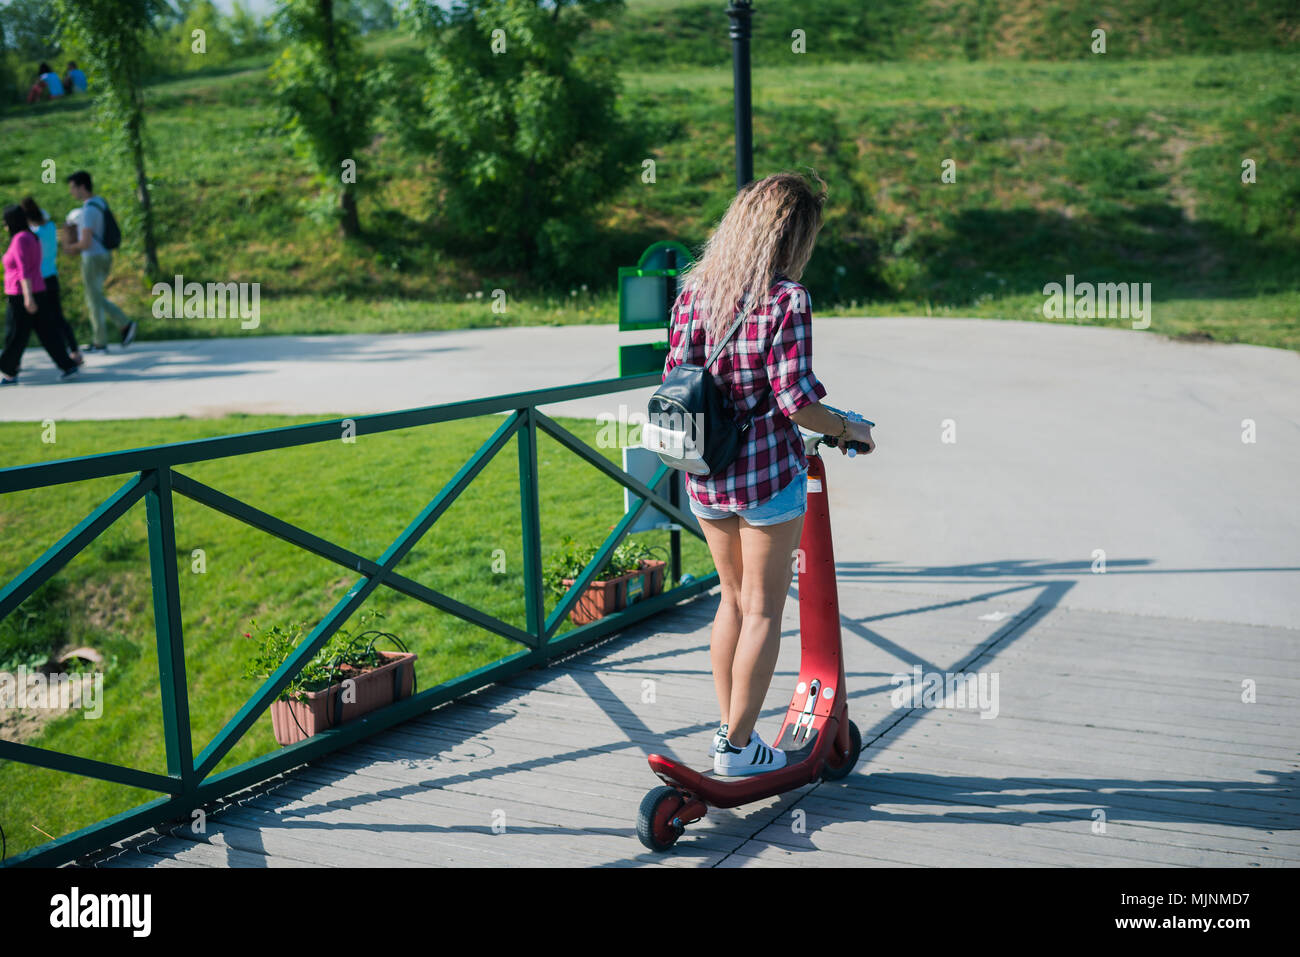 BUCHAREST, ROMANIA, - October 26, 2017: Woman using electric scooter in the park on a sunny day. Illustrative editorial content. Stock Photo